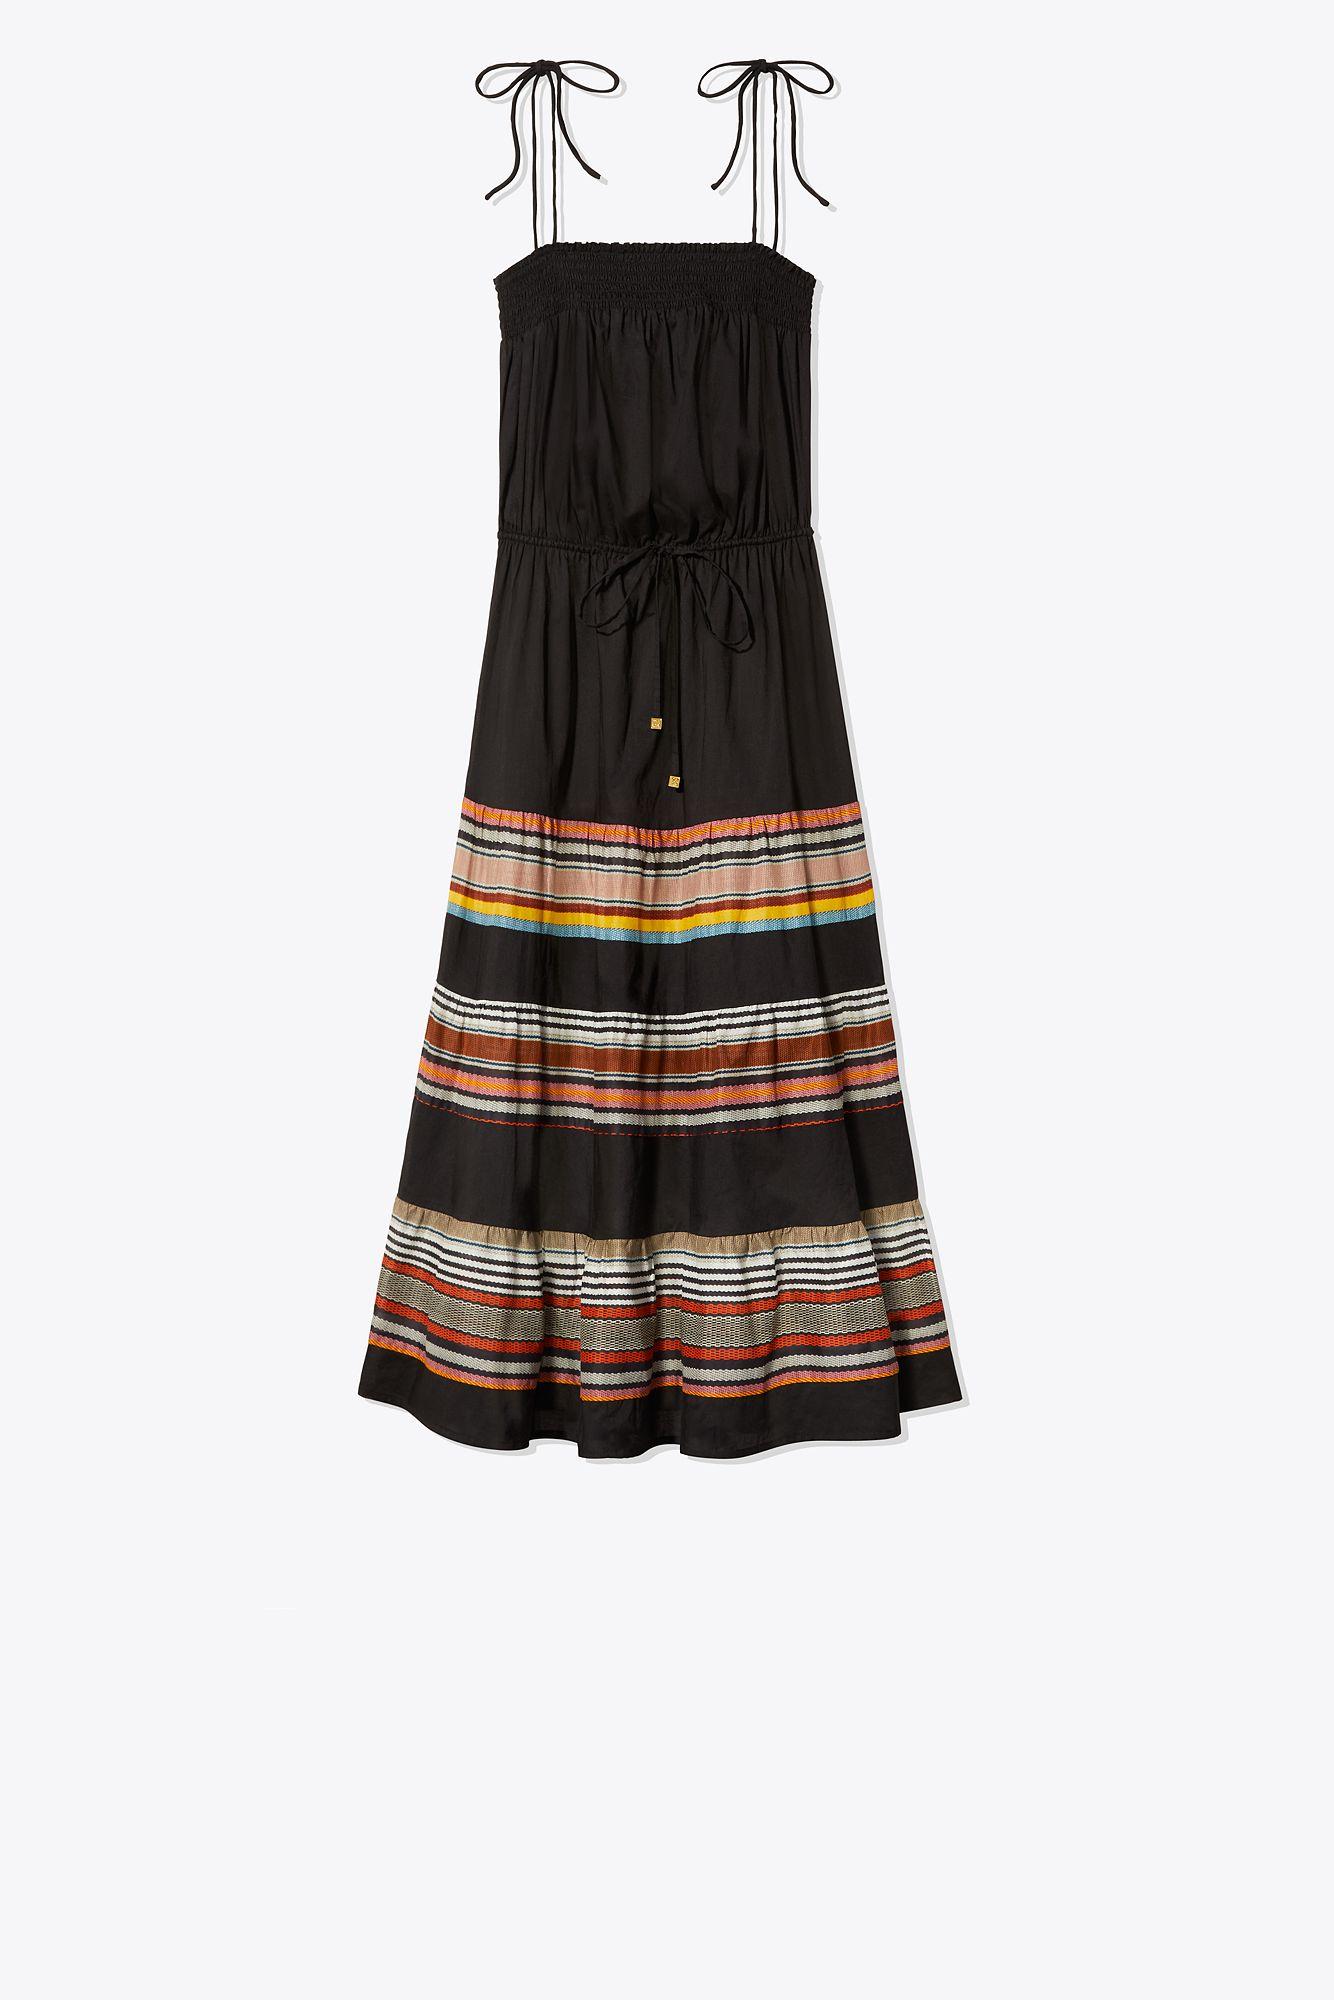 Lyst - Tory Burch Smocked Sundress in Black - Save 5%